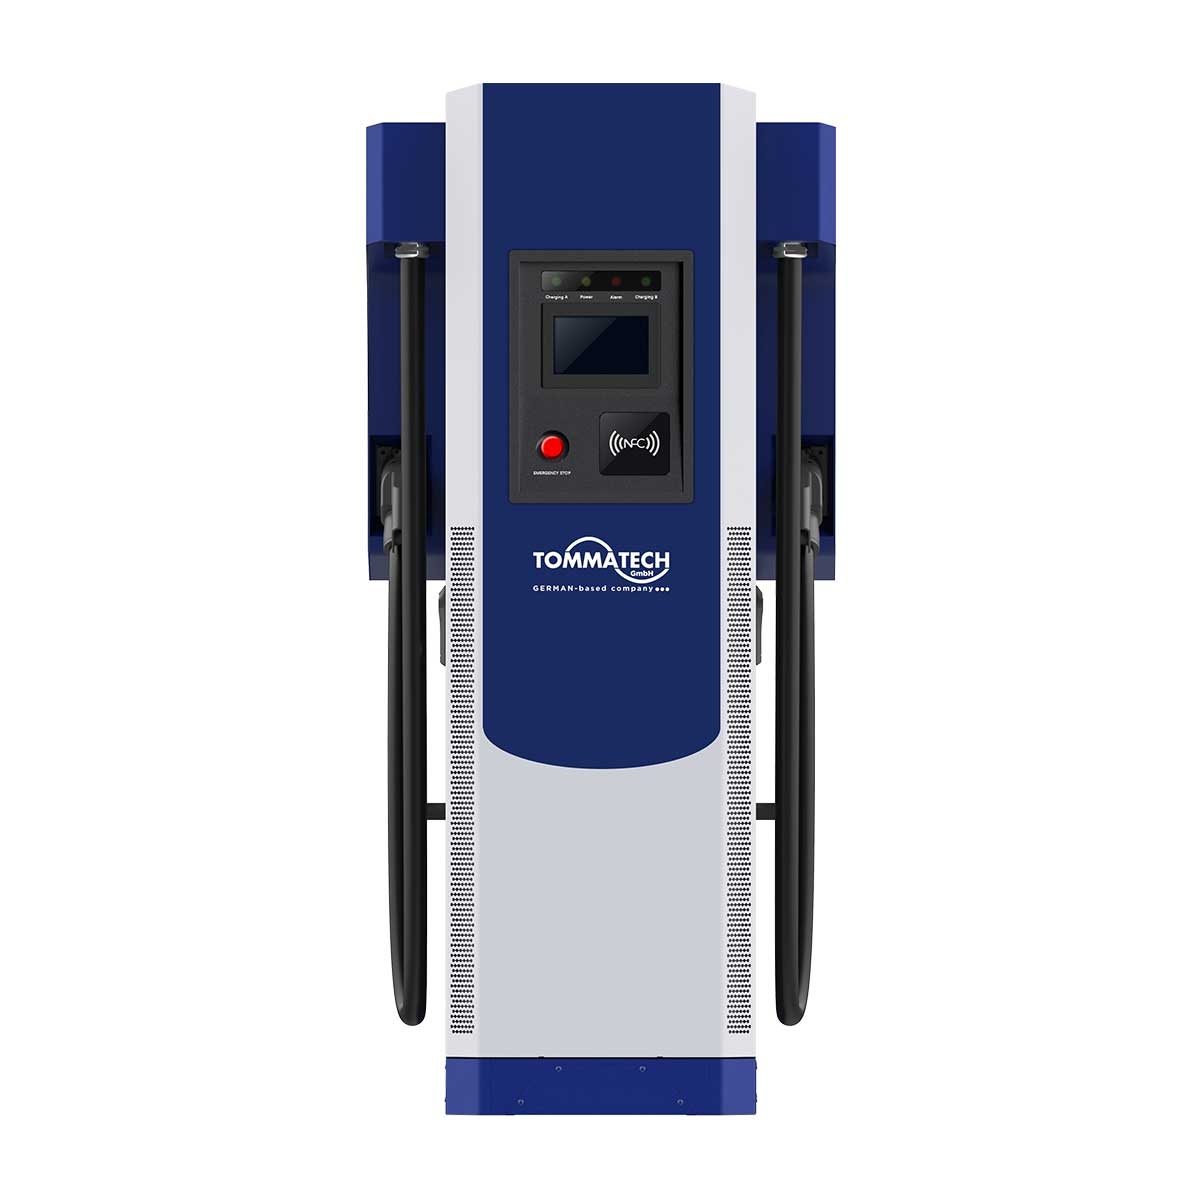 TommaTech Commercial 120kW DC Electric Vehicle Charging Station